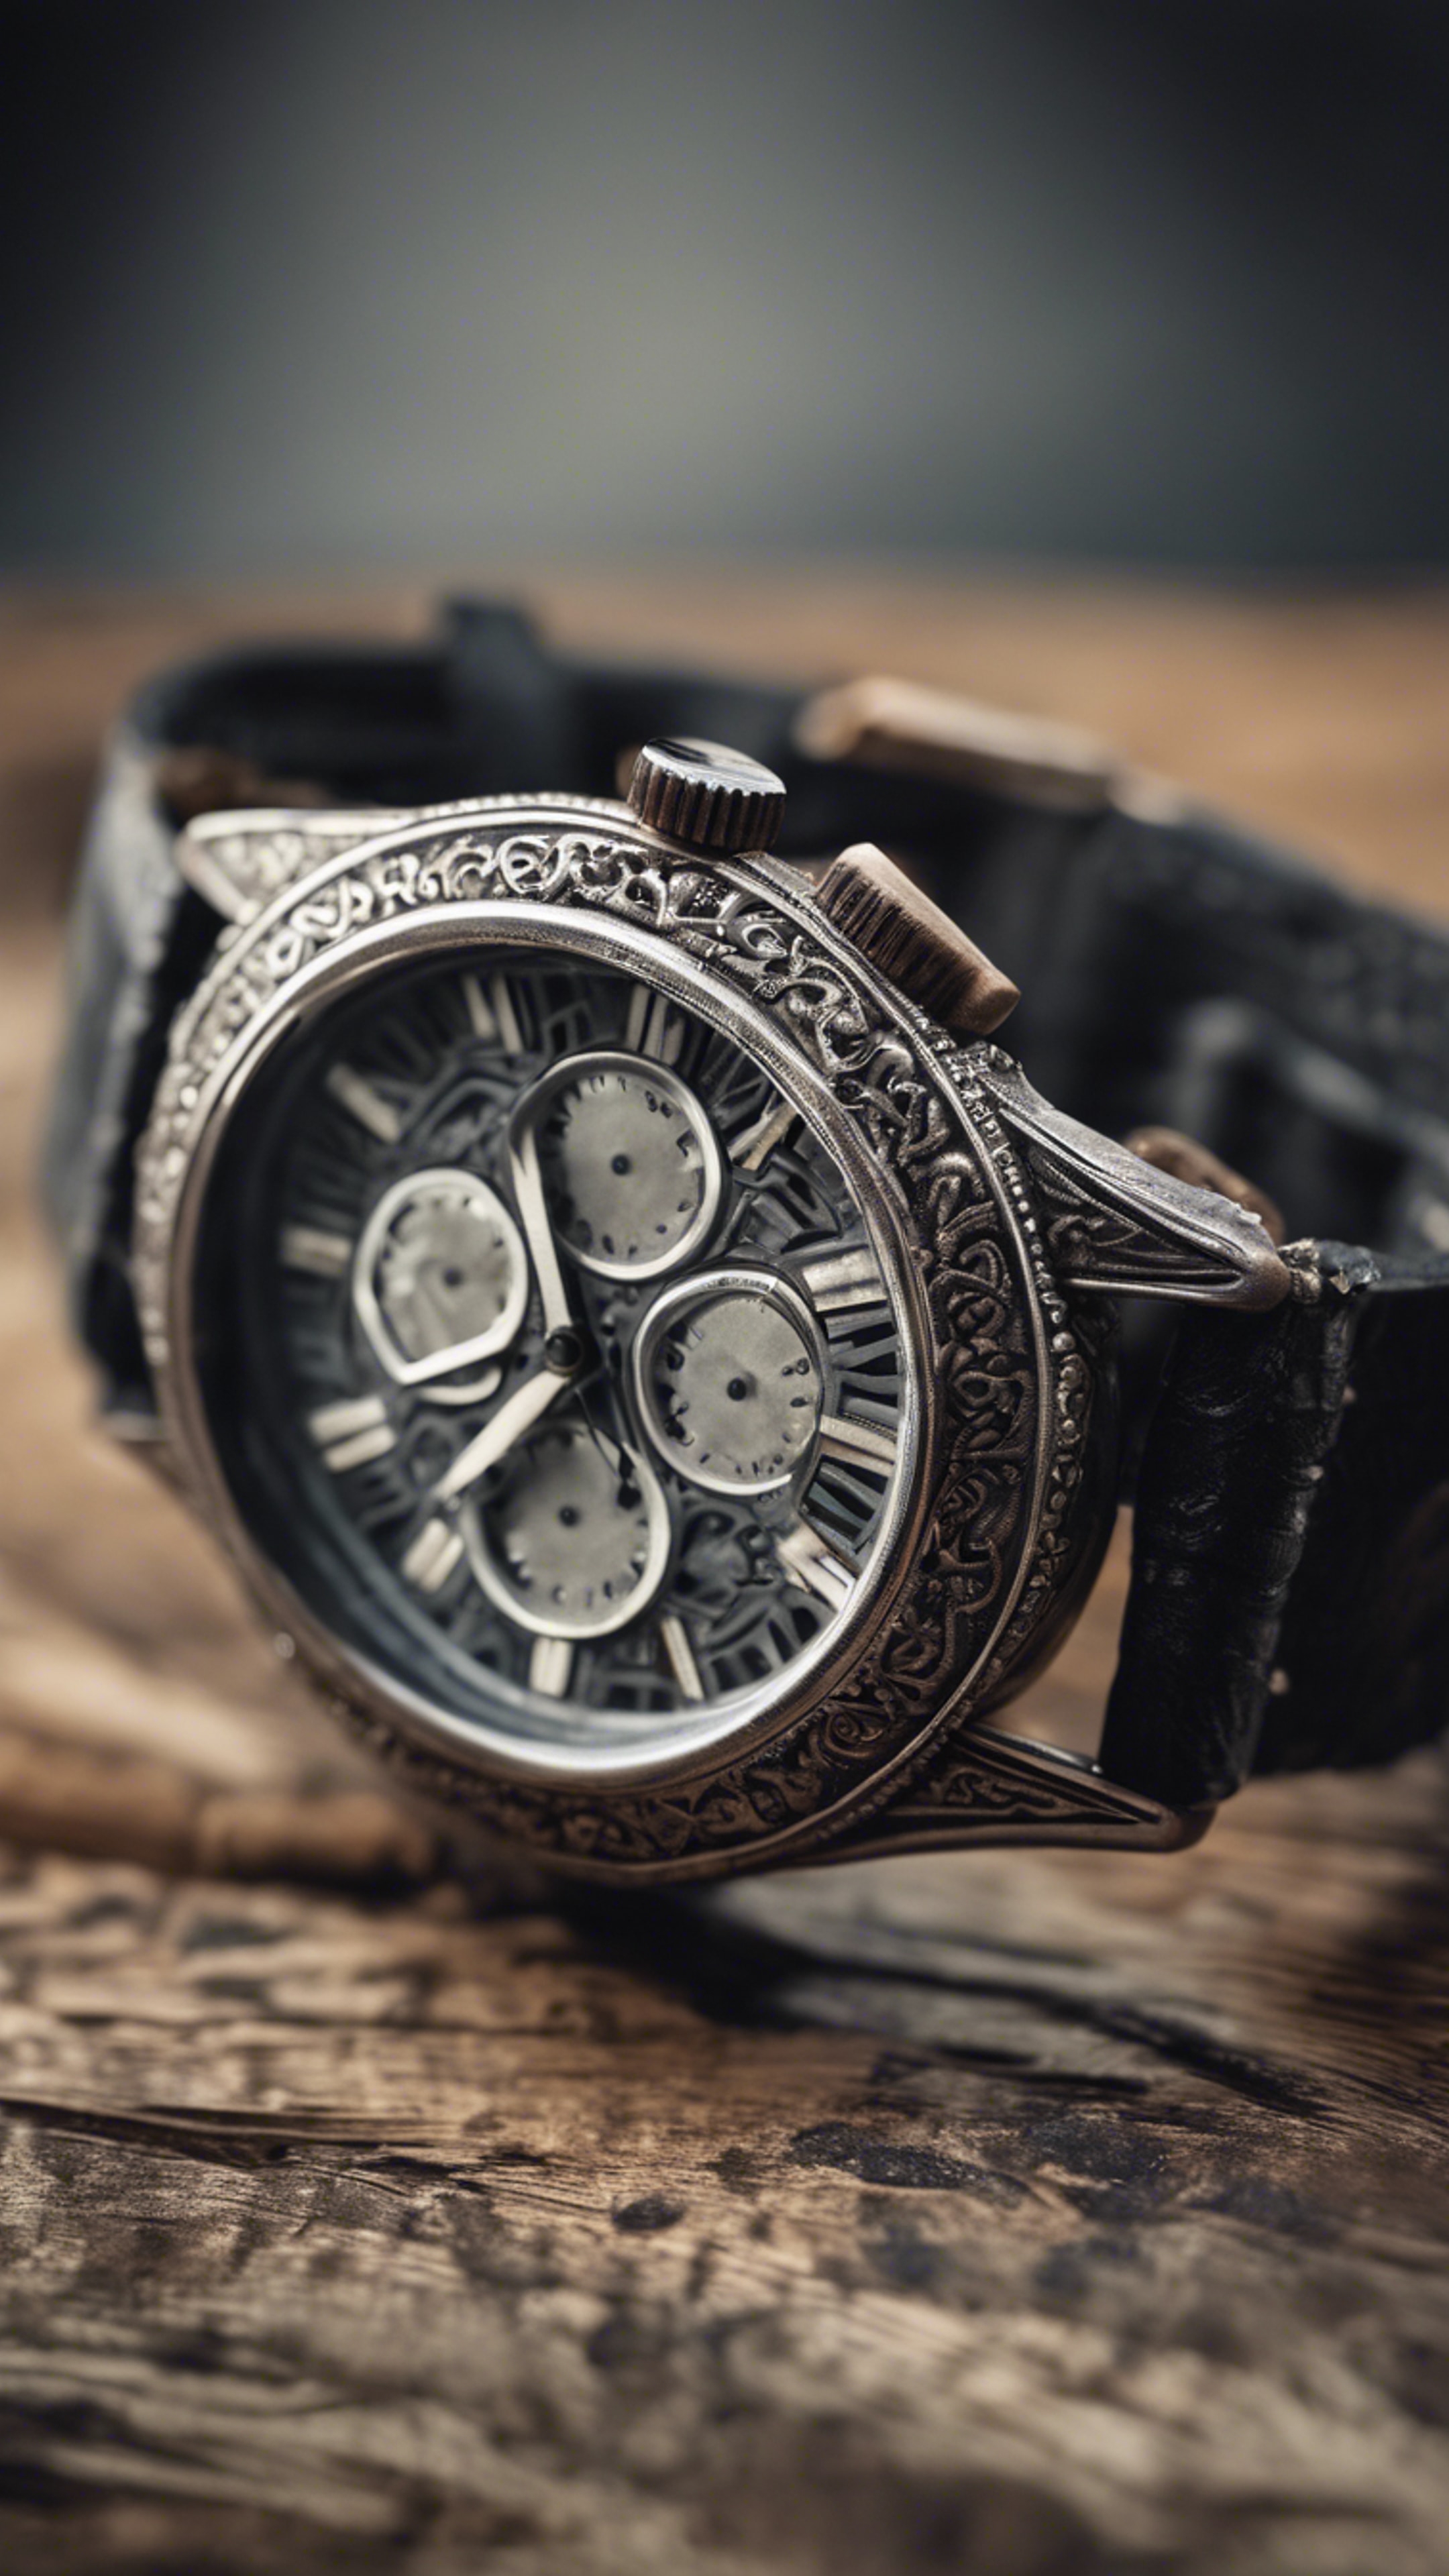 An antique, rustic, black and gray wristwatch with intricate details in its design. 牆紙[fa36b50287764cf98f6d]